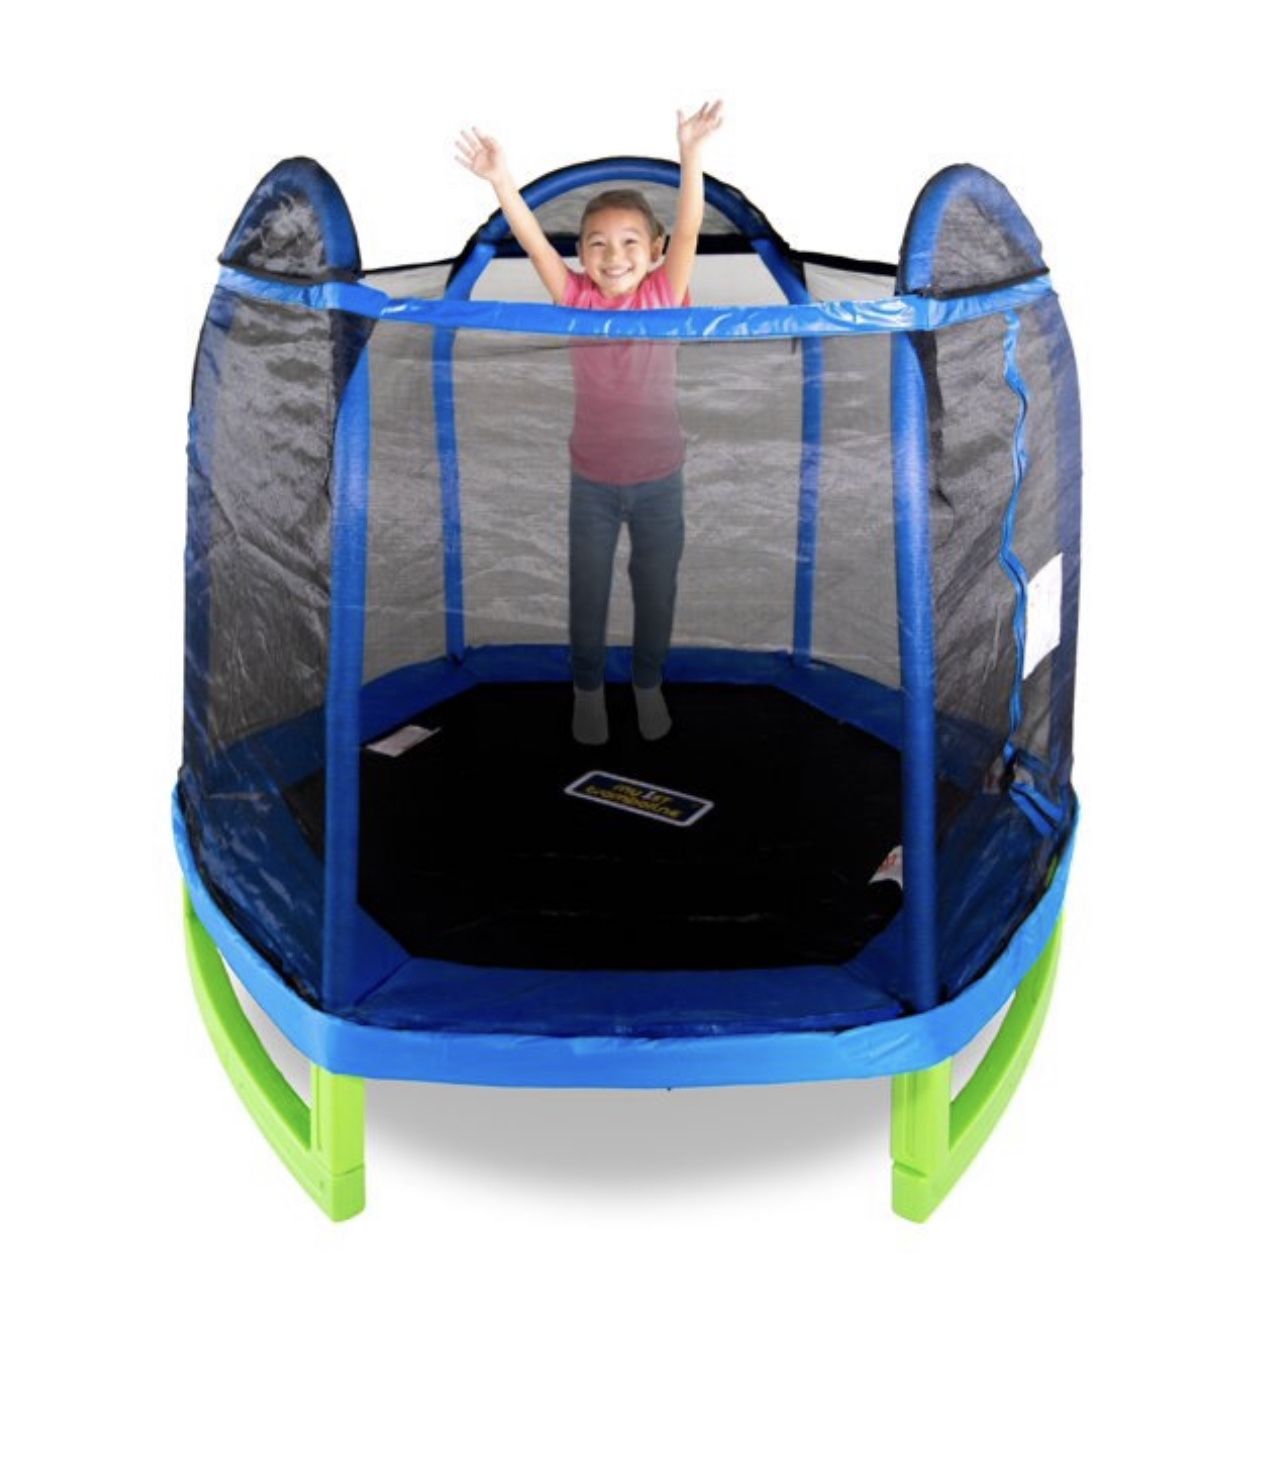 Bounce Pro 7-Foot My First Trampoline With Flash Light Zone (Ages 3-10)